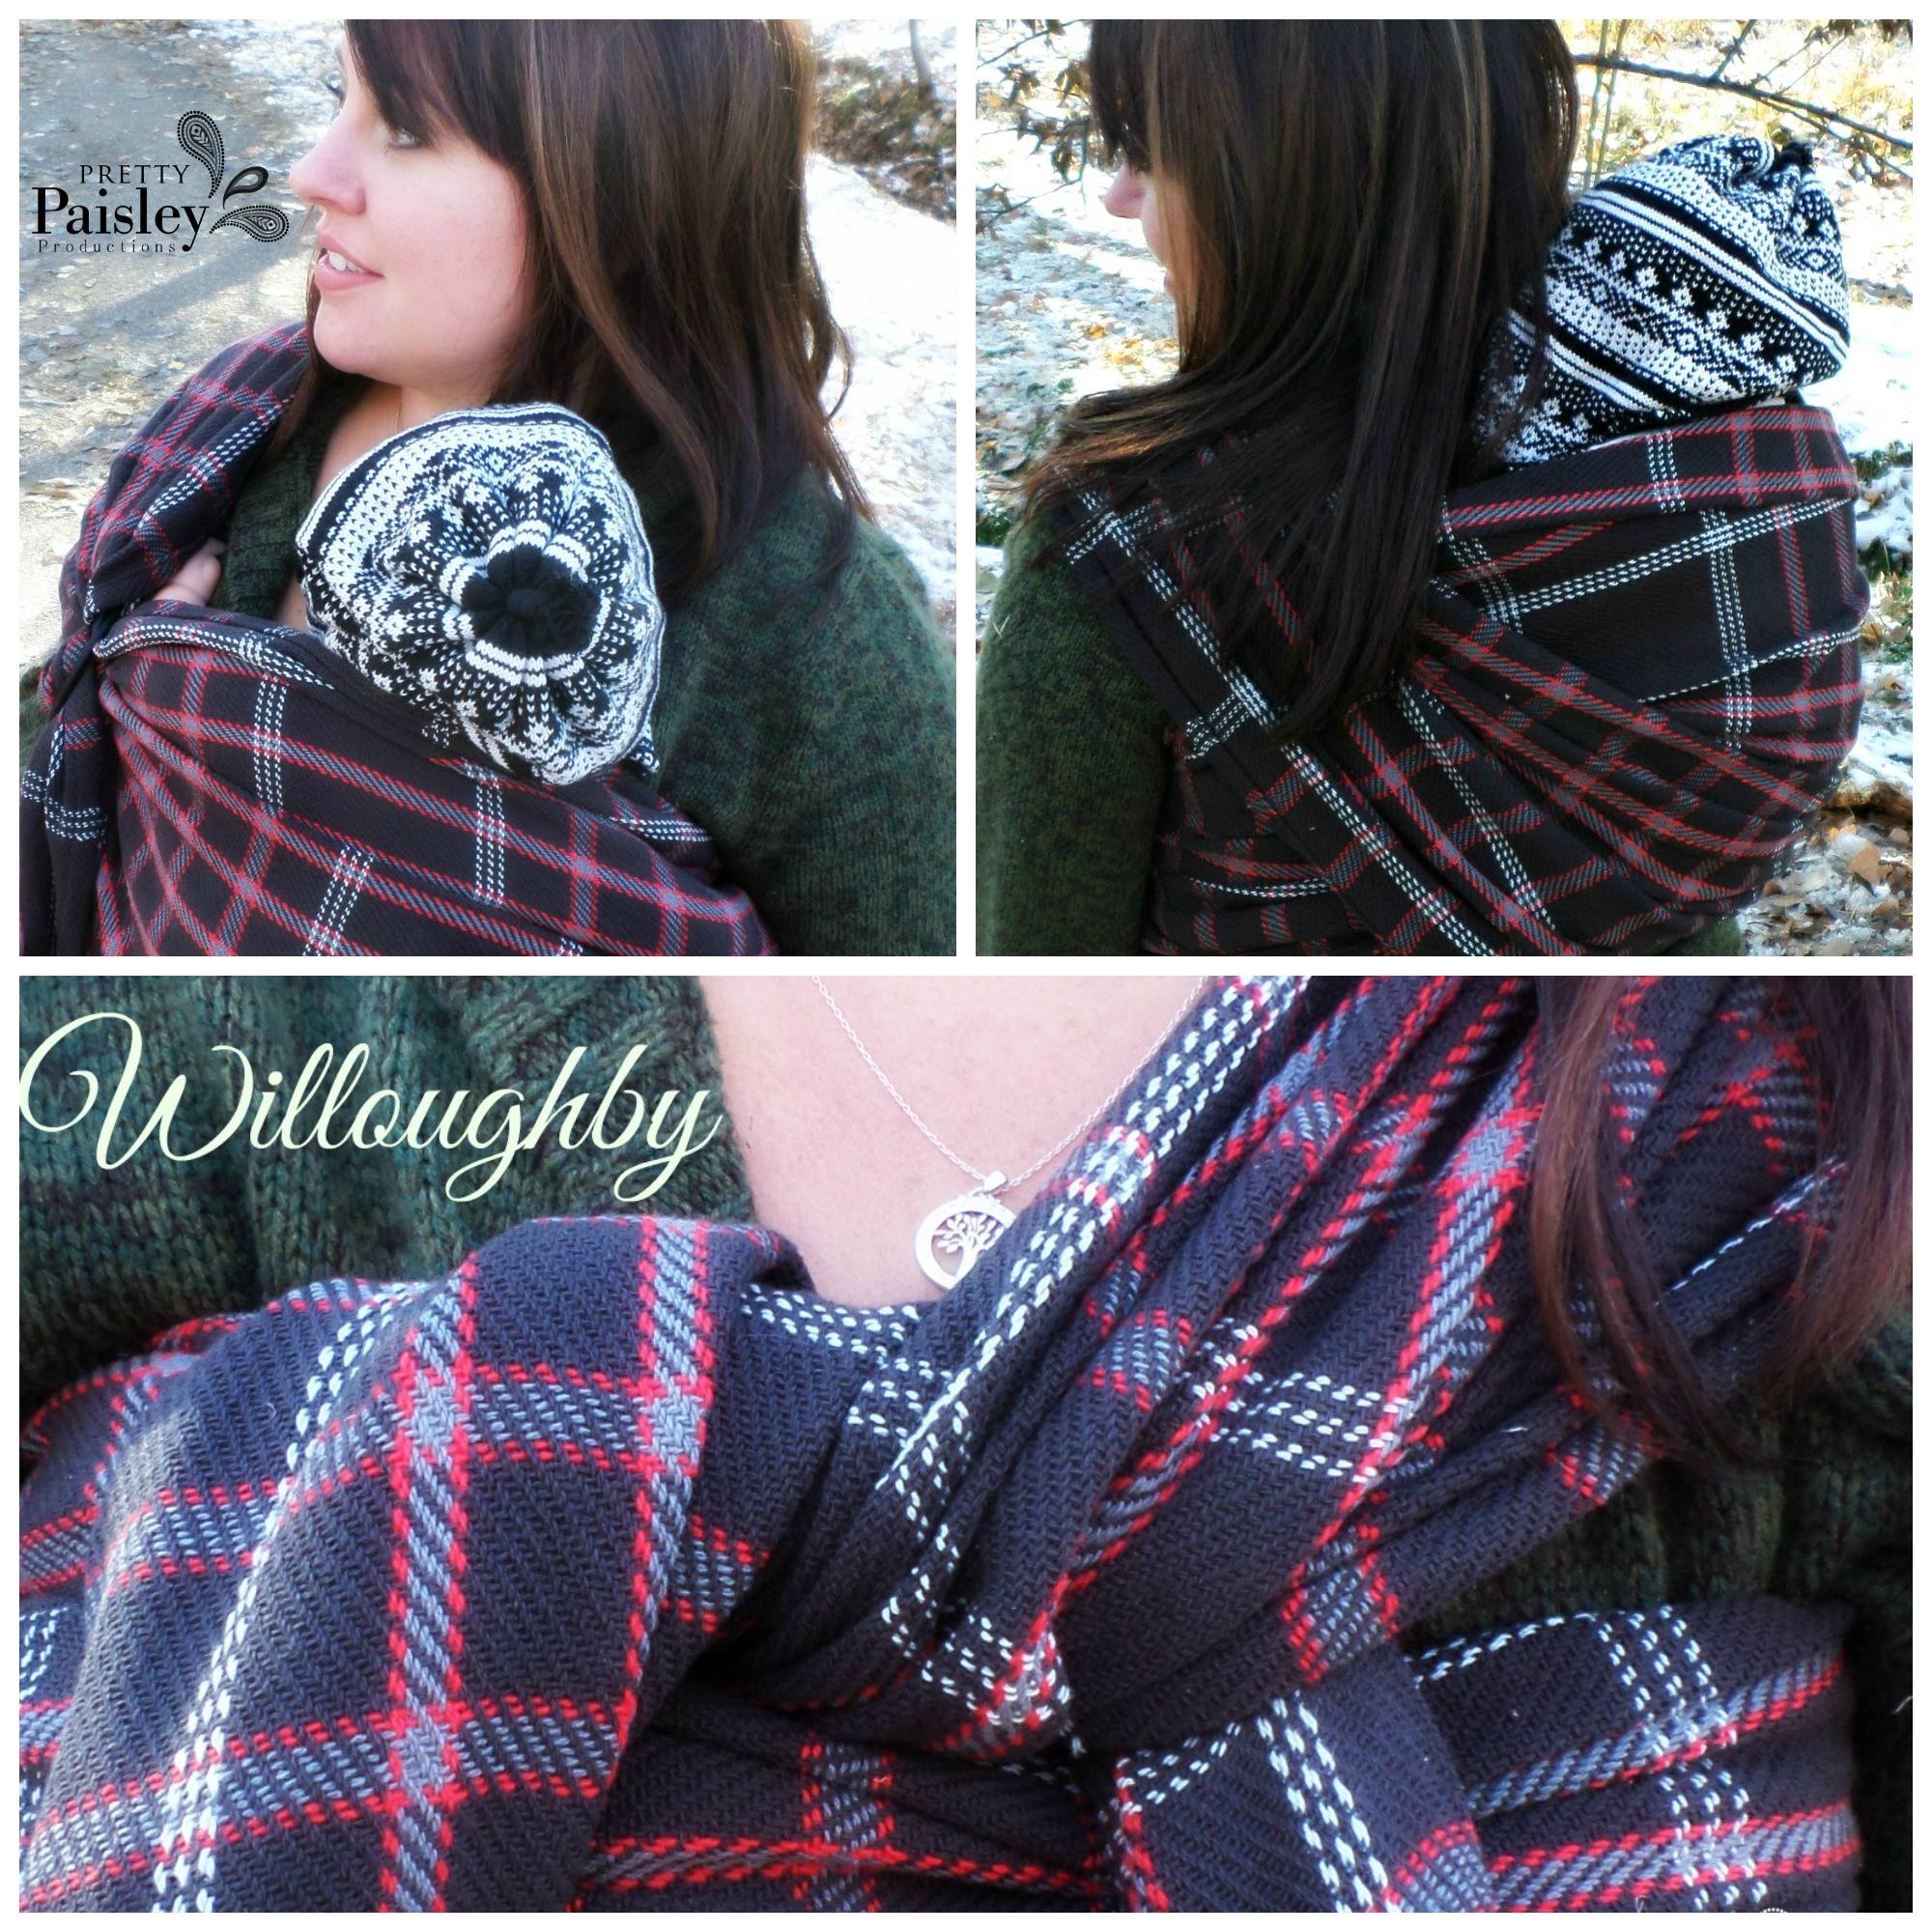 Pretty Paisley Production checkered WILLOUGHBY  Image